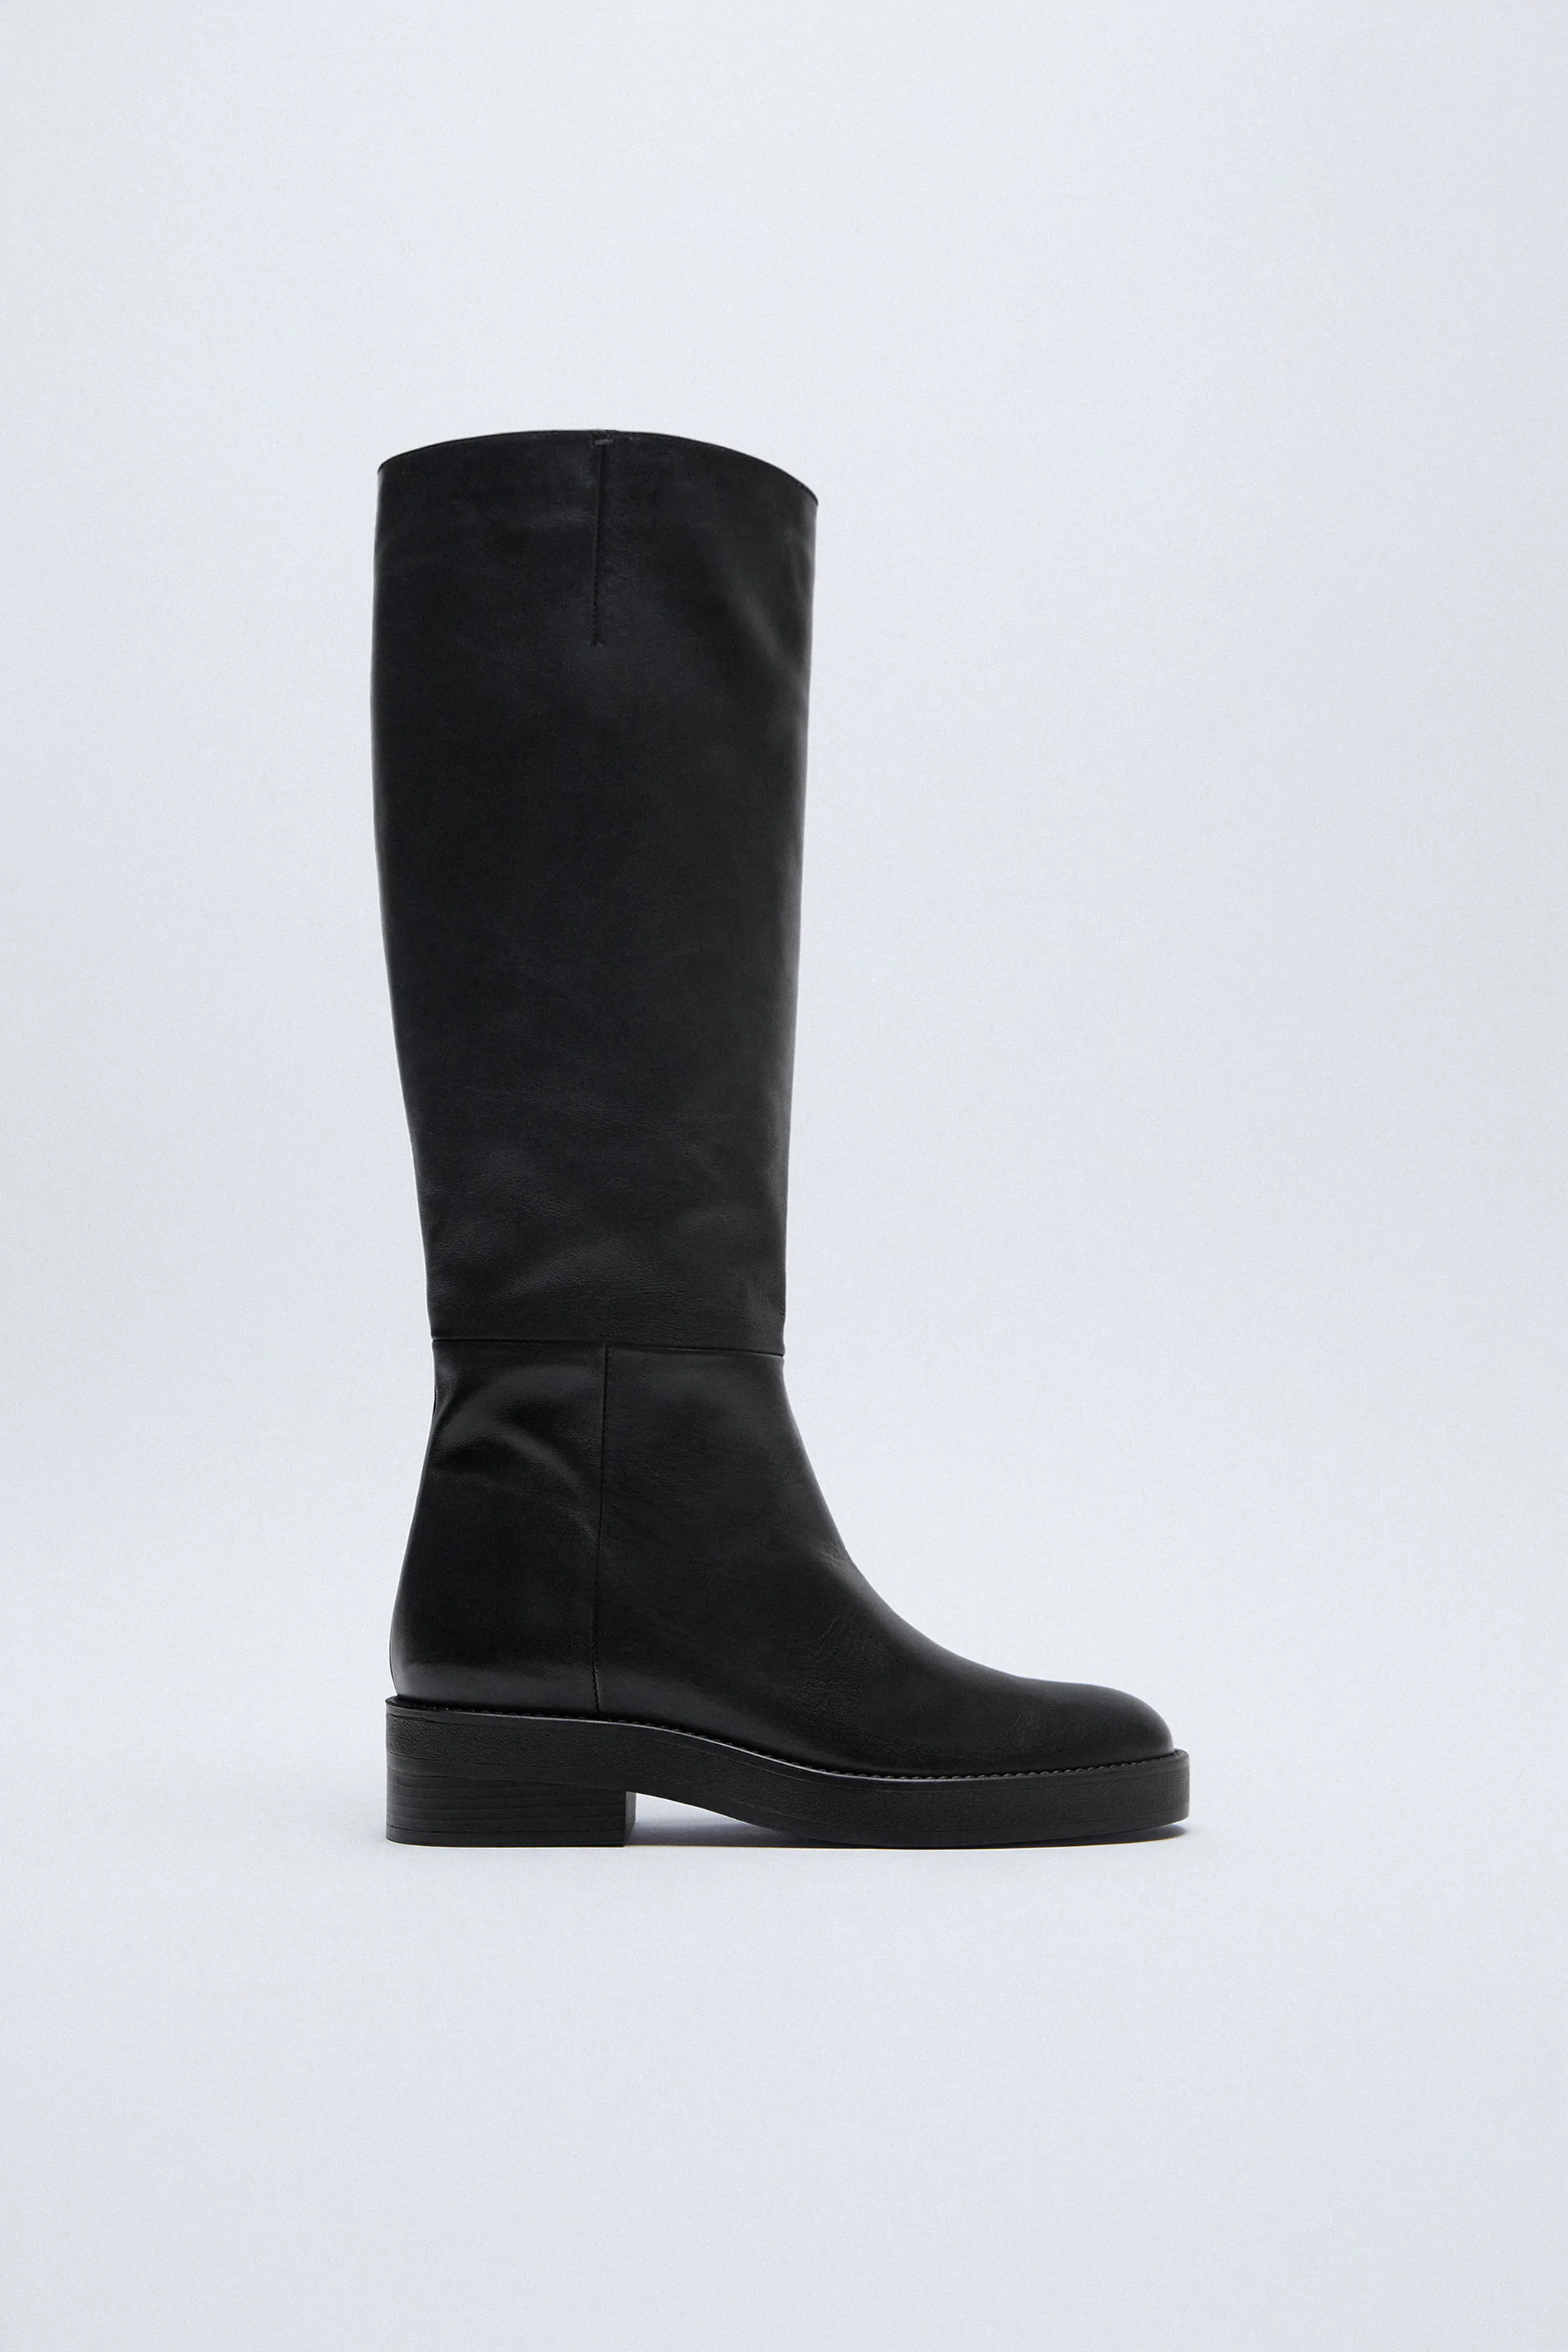 Zara + Low-Heeled Leather Tall Boots